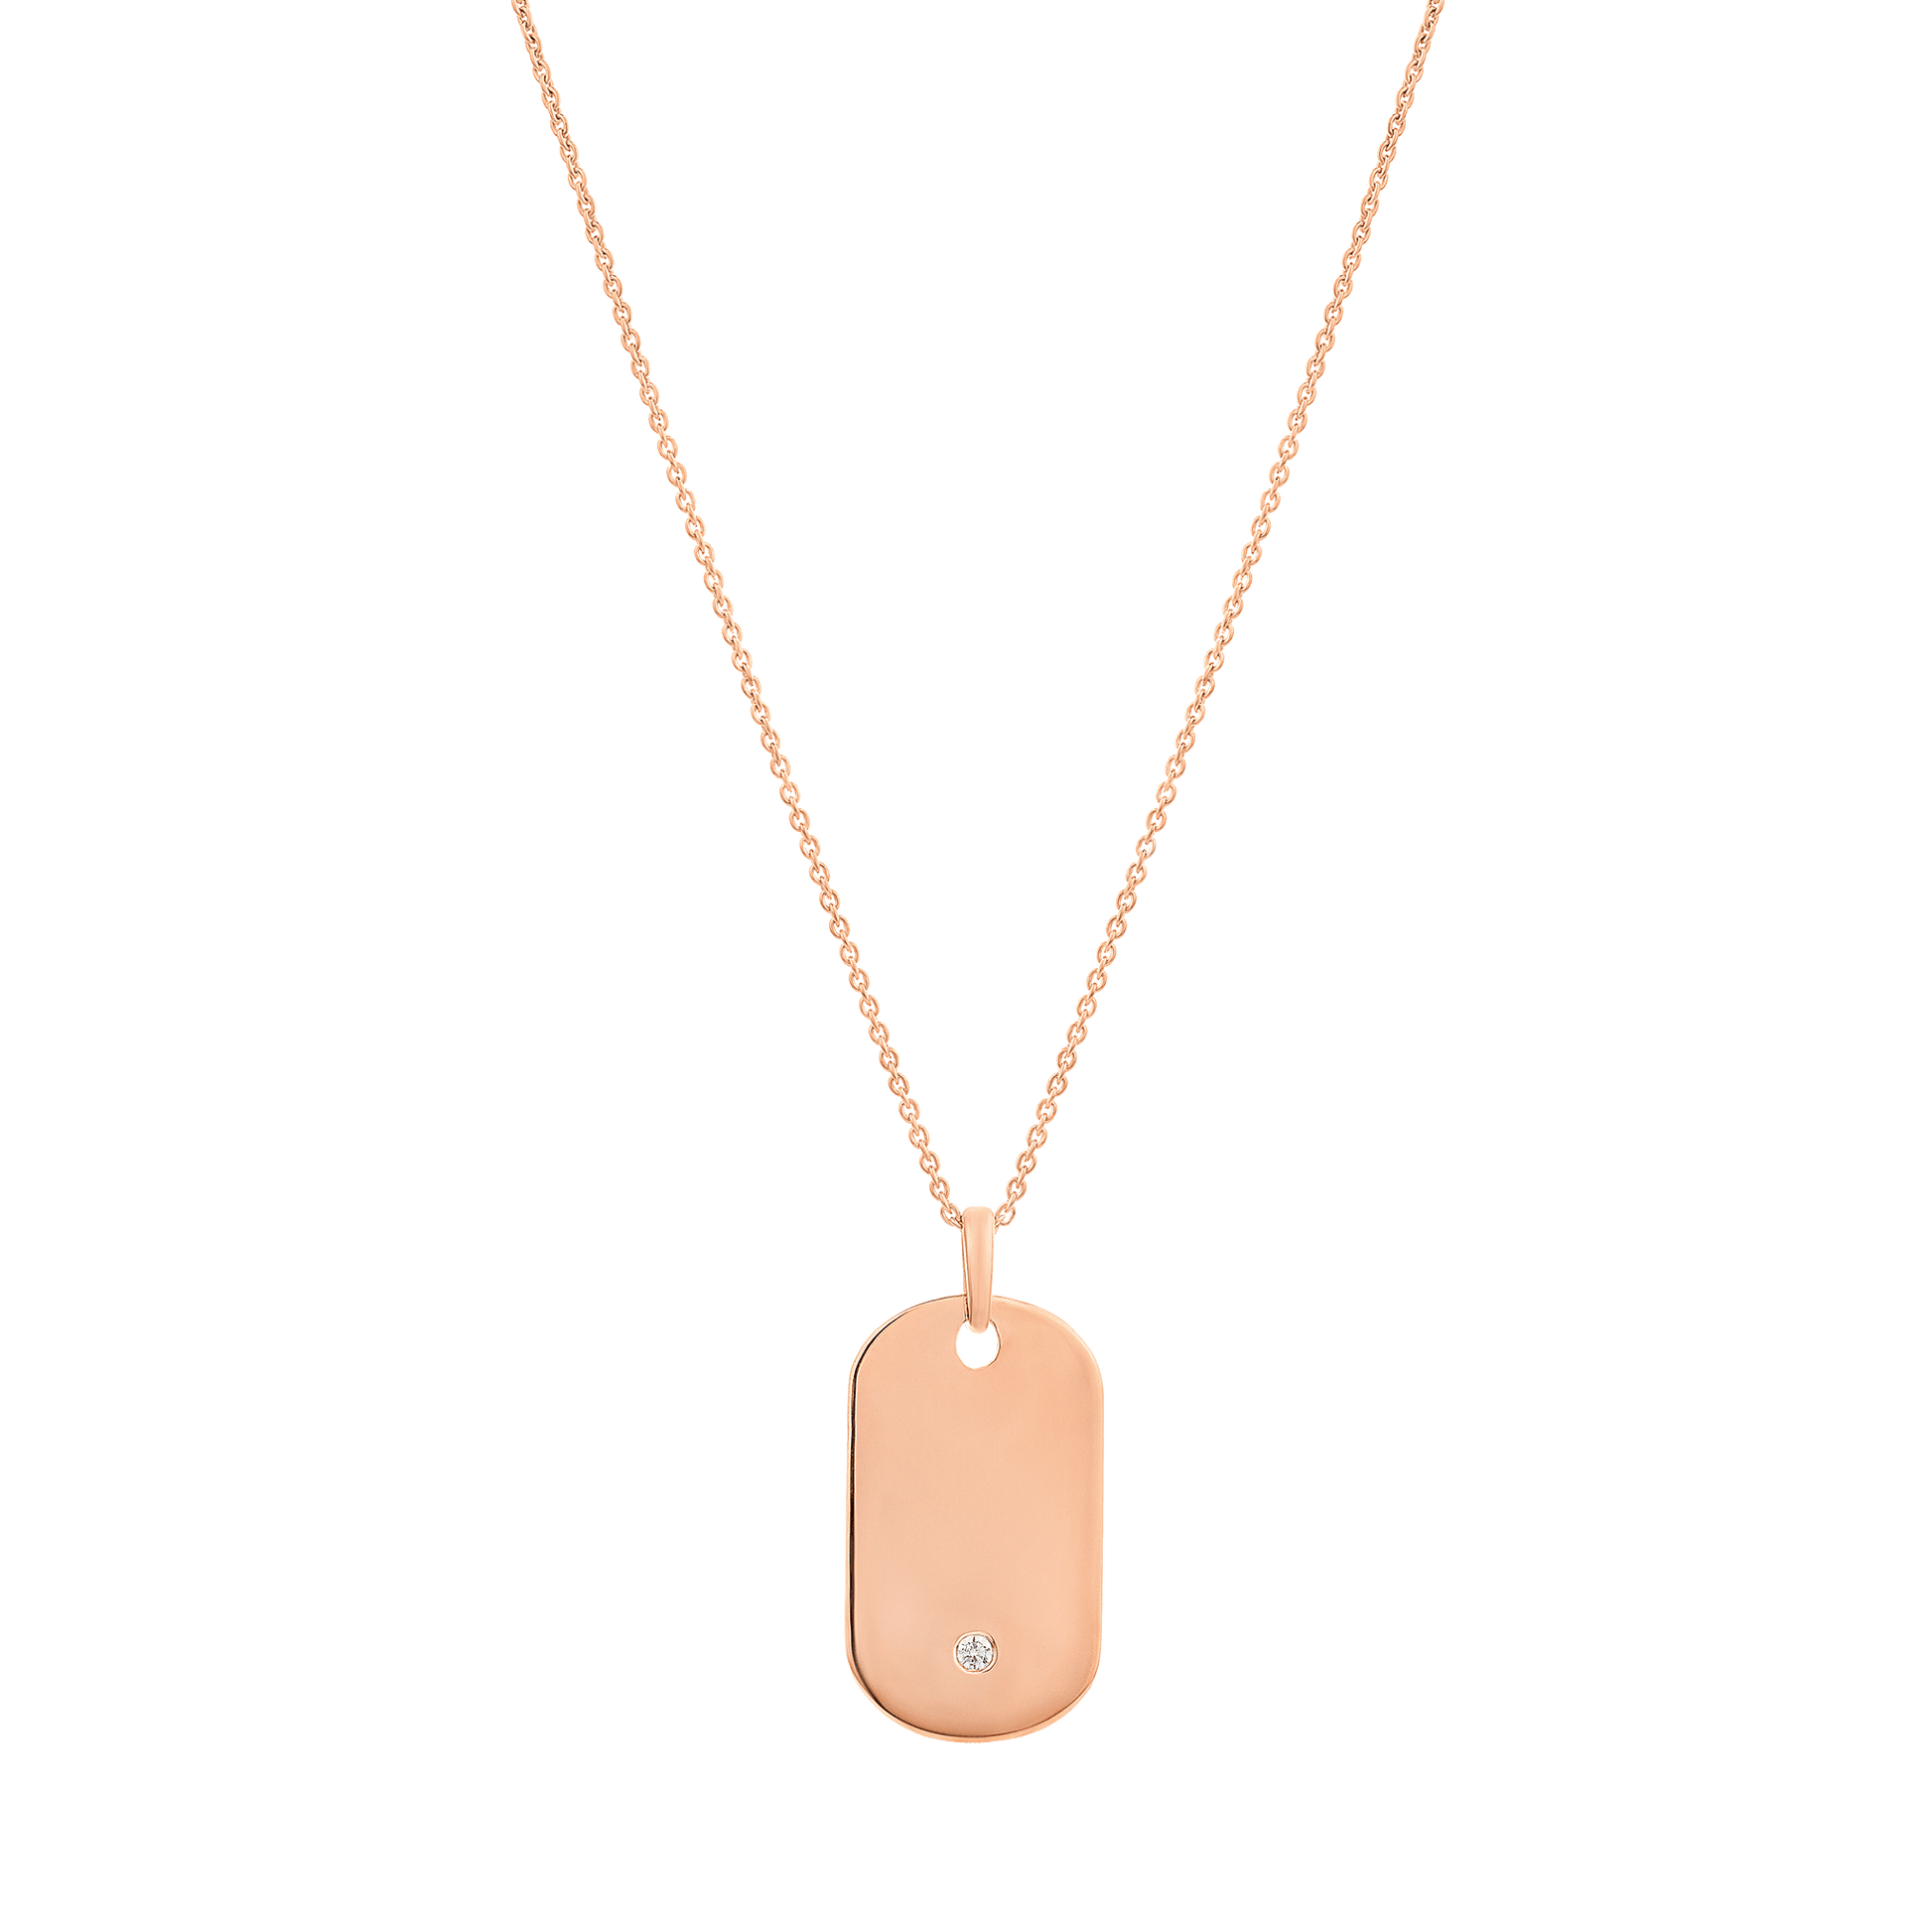 Single Diamond Plate - 14K Yellow Gold Necklaces 14K Solid Gold 